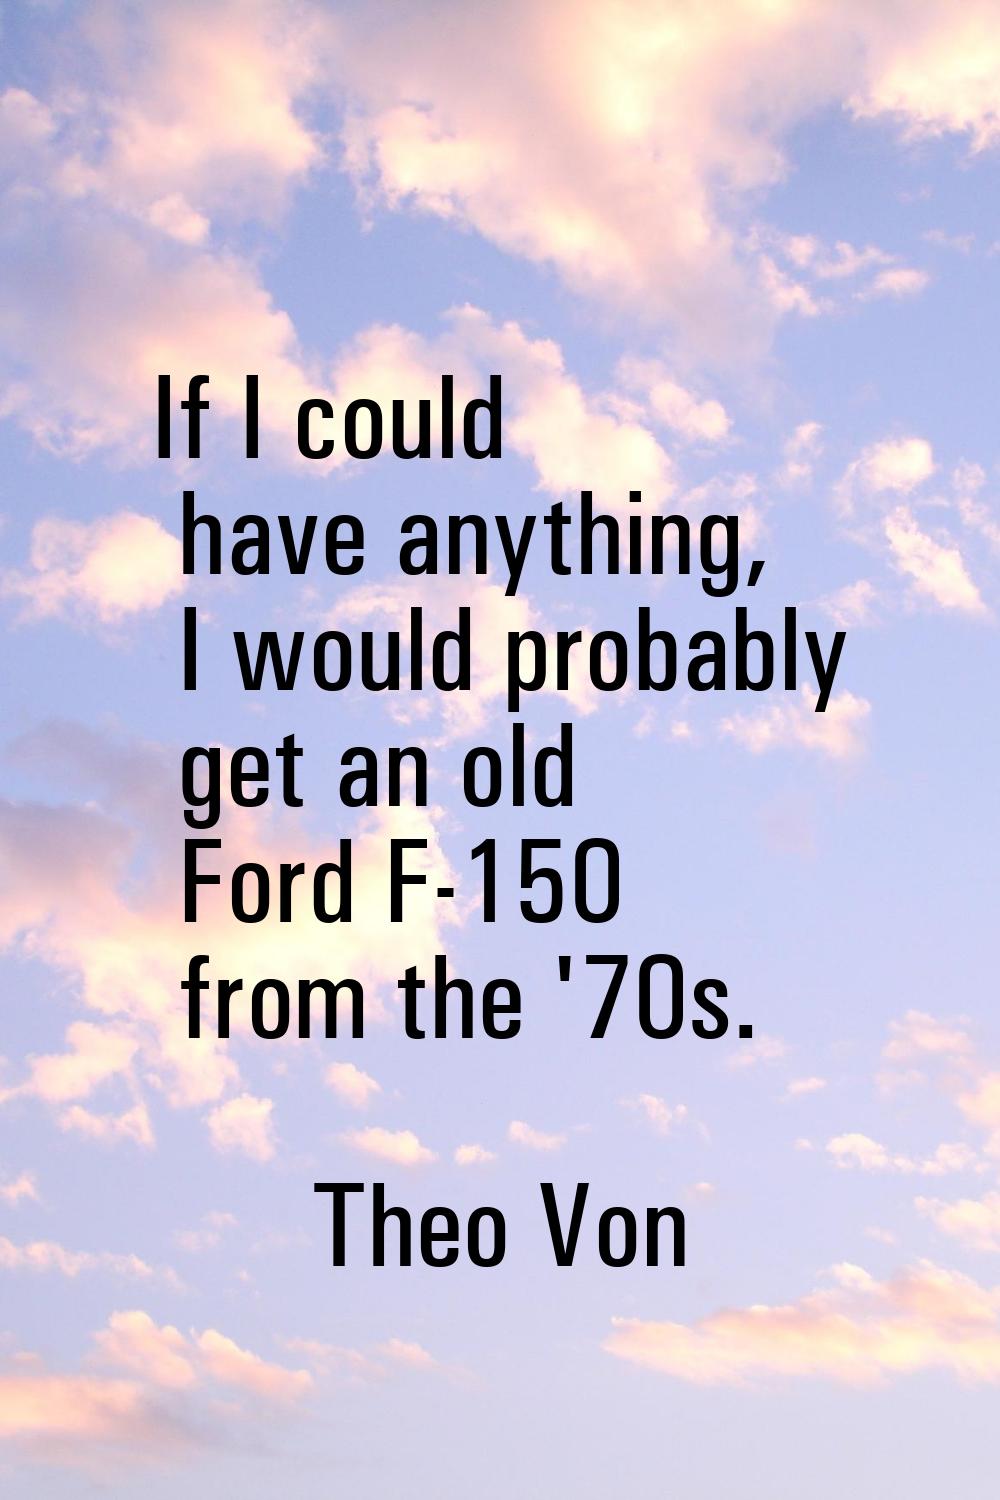 If I could have anything, I would probably get an old Ford F-150 from the '70s.